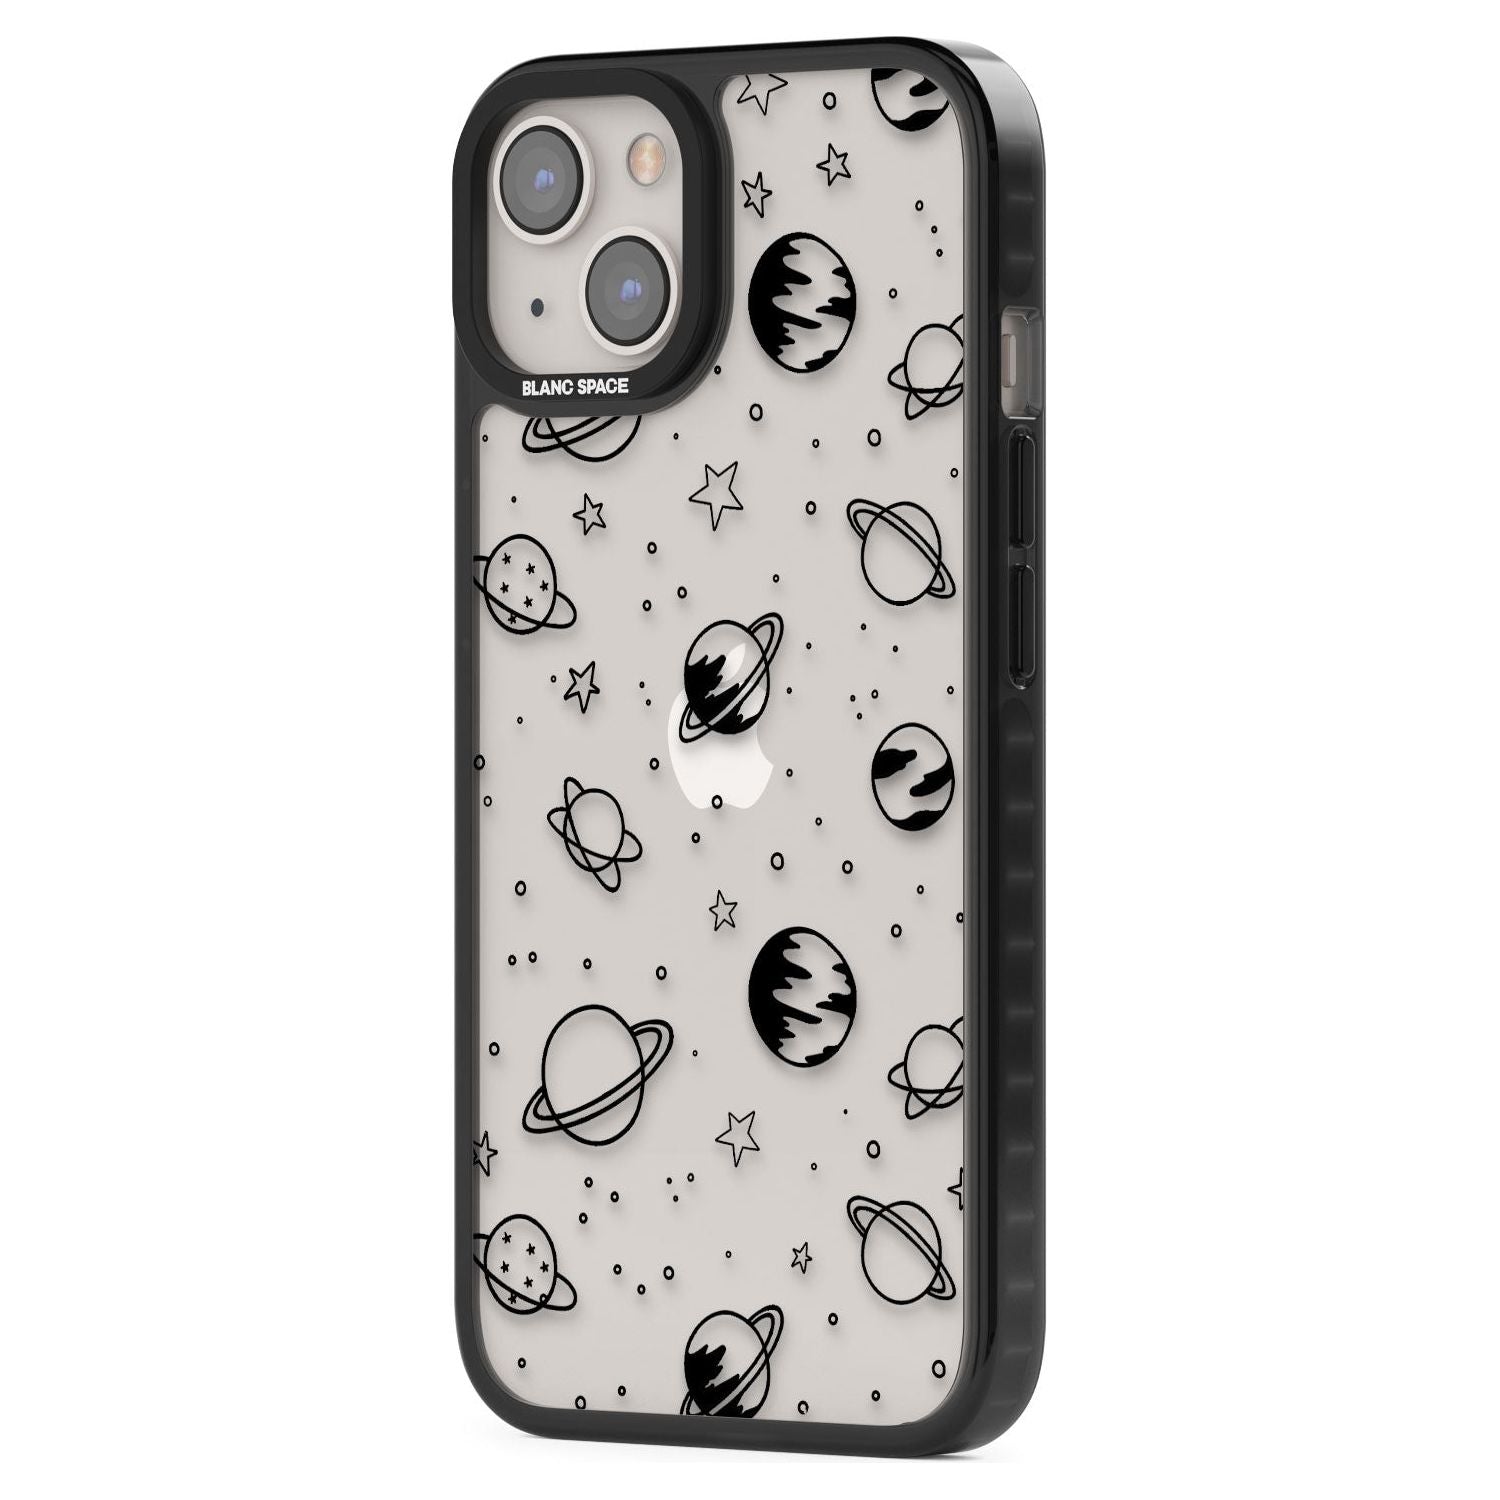 Cosmic Outer Space Design Black on Clear Phone Case iPhone 15 Pro Max / Black Impact Case,iPhone 15 Plus / Black Impact Case,iPhone 15 Pro / Black Impact Case,iPhone 15 / Black Impact Case,iPhone 15 Pro Max / Impact Case,iPhone 15 Plus / Impact Case,iPhone 15 Pro / Impact Case,iPhone 15 / Impact Case,iPhone 15 Pro Max / Magsafe Black Impact Case,iPhone 15 Plus / Magsafe Black Impact Case,iPhone 15 Pro / Magsafe Black Impact Case,iPhone 15 / Magsafe Black Impact Case,iPhon